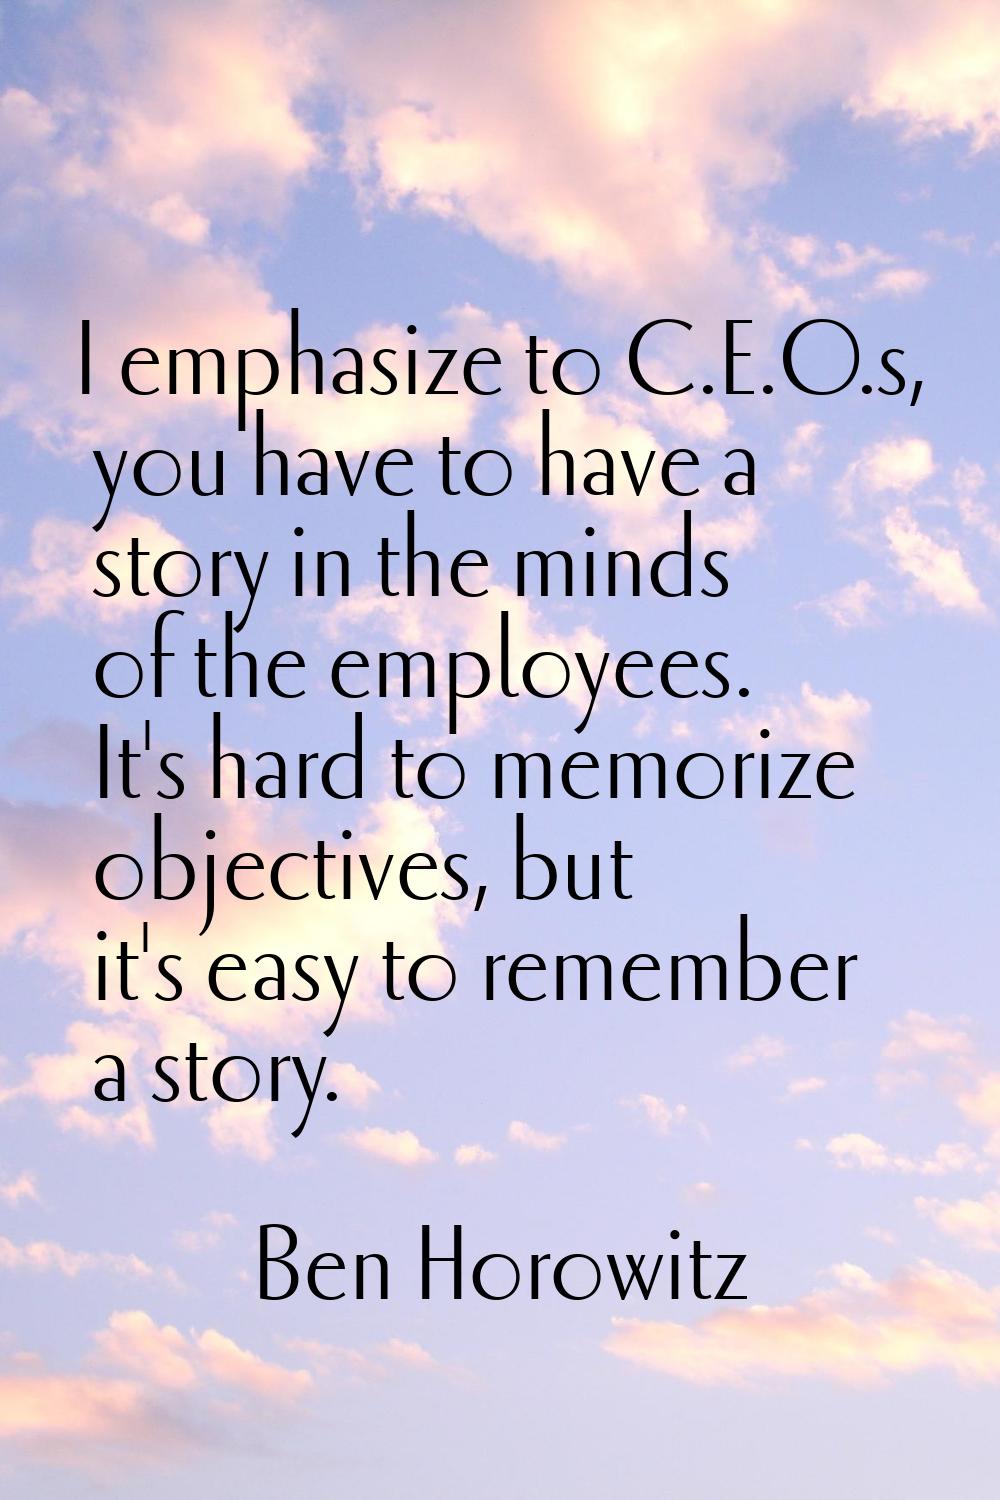 I emphasize to C.E.O.s, you have to have a story in the minds of the employees. It's hard to memori